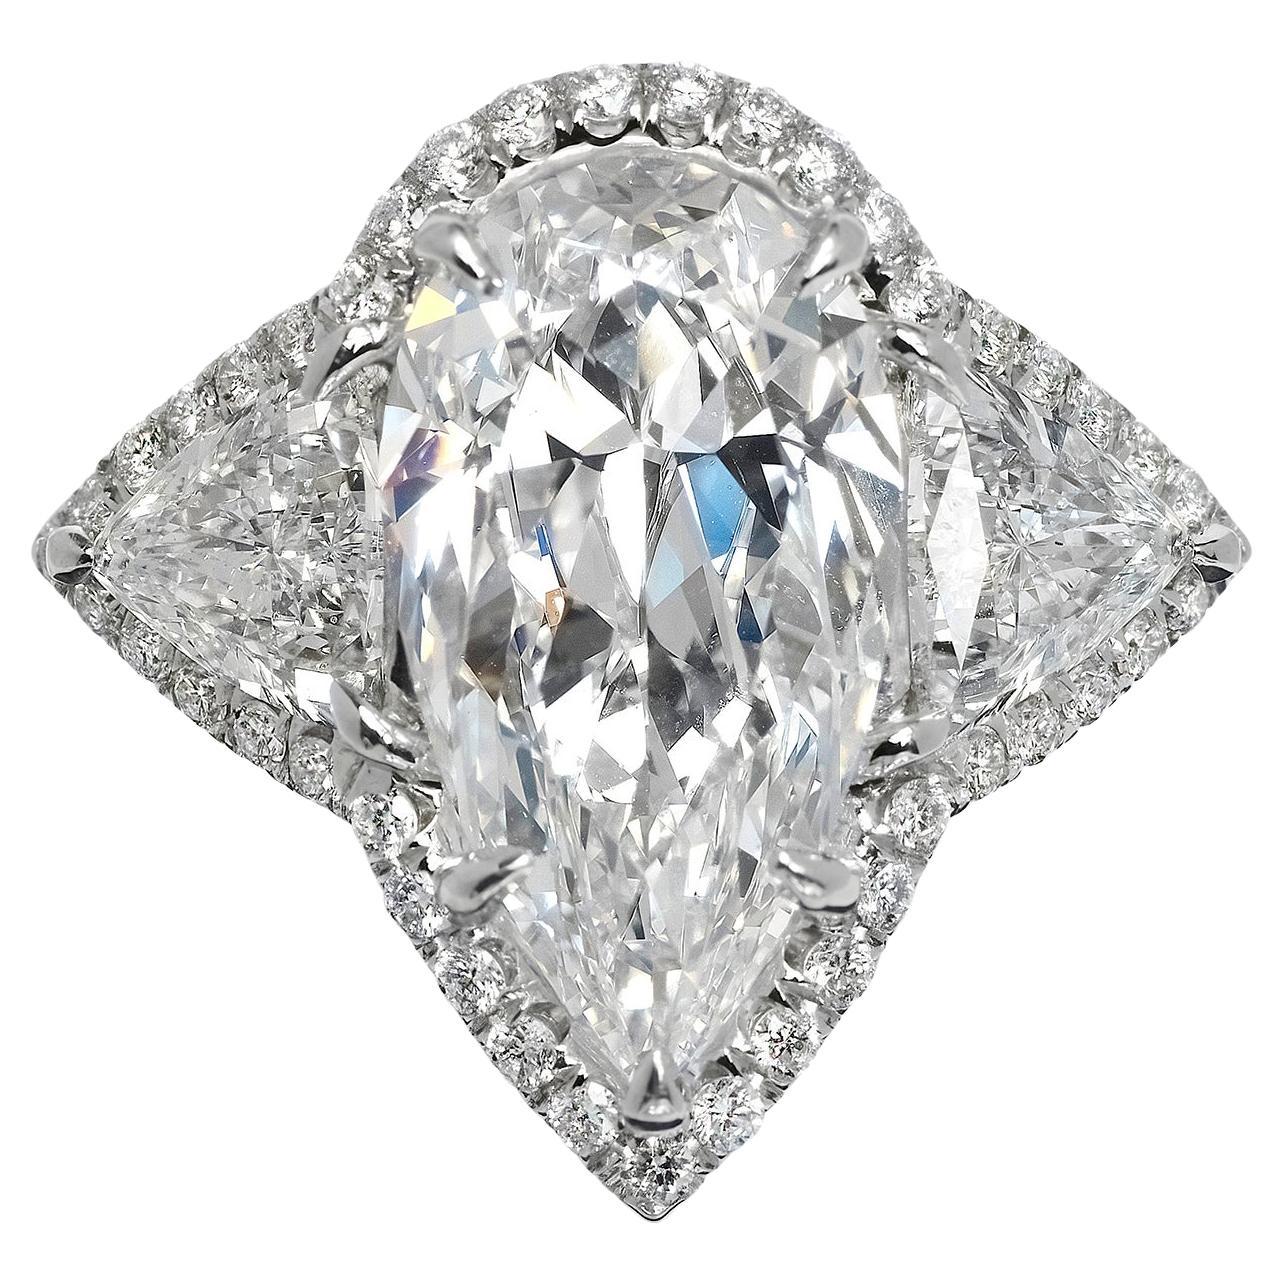 6 Carat Internally Flawless Pear Shaped Diamond Engagement Ring GIA Certified E For Sale